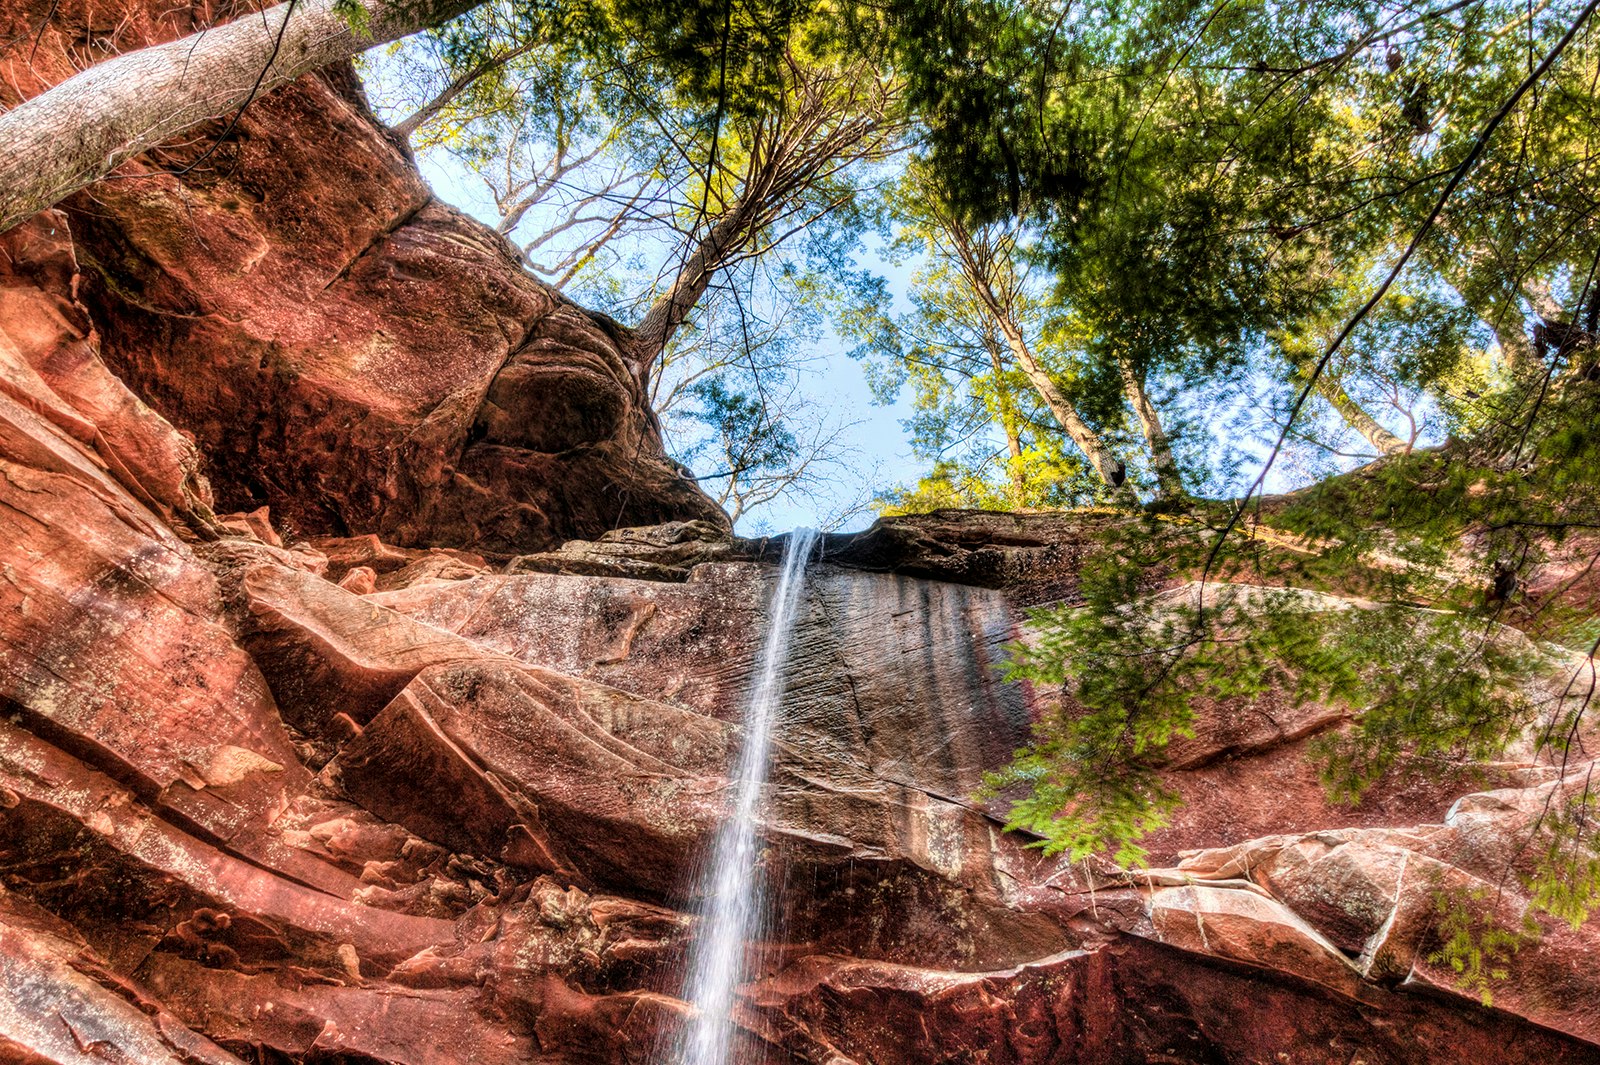 Upward shot of a waterfall trickling over the red rock walls of a canyon, with blue sky and green trees overhead